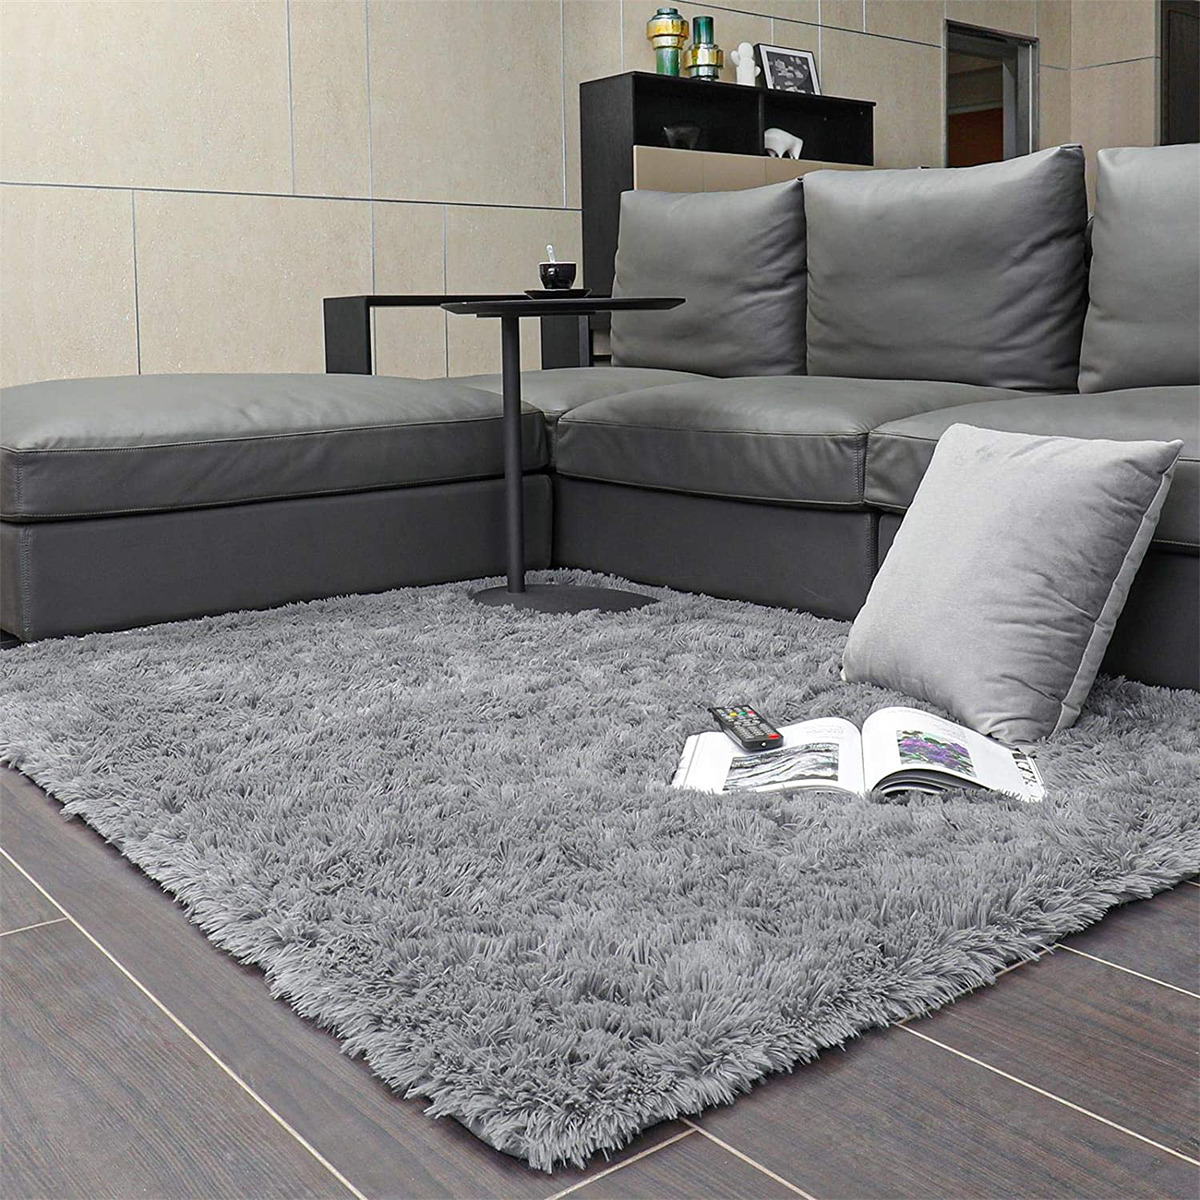 4X5.3 Ft Machine Washable Rugs Shaggy Soft Area Rug for Living